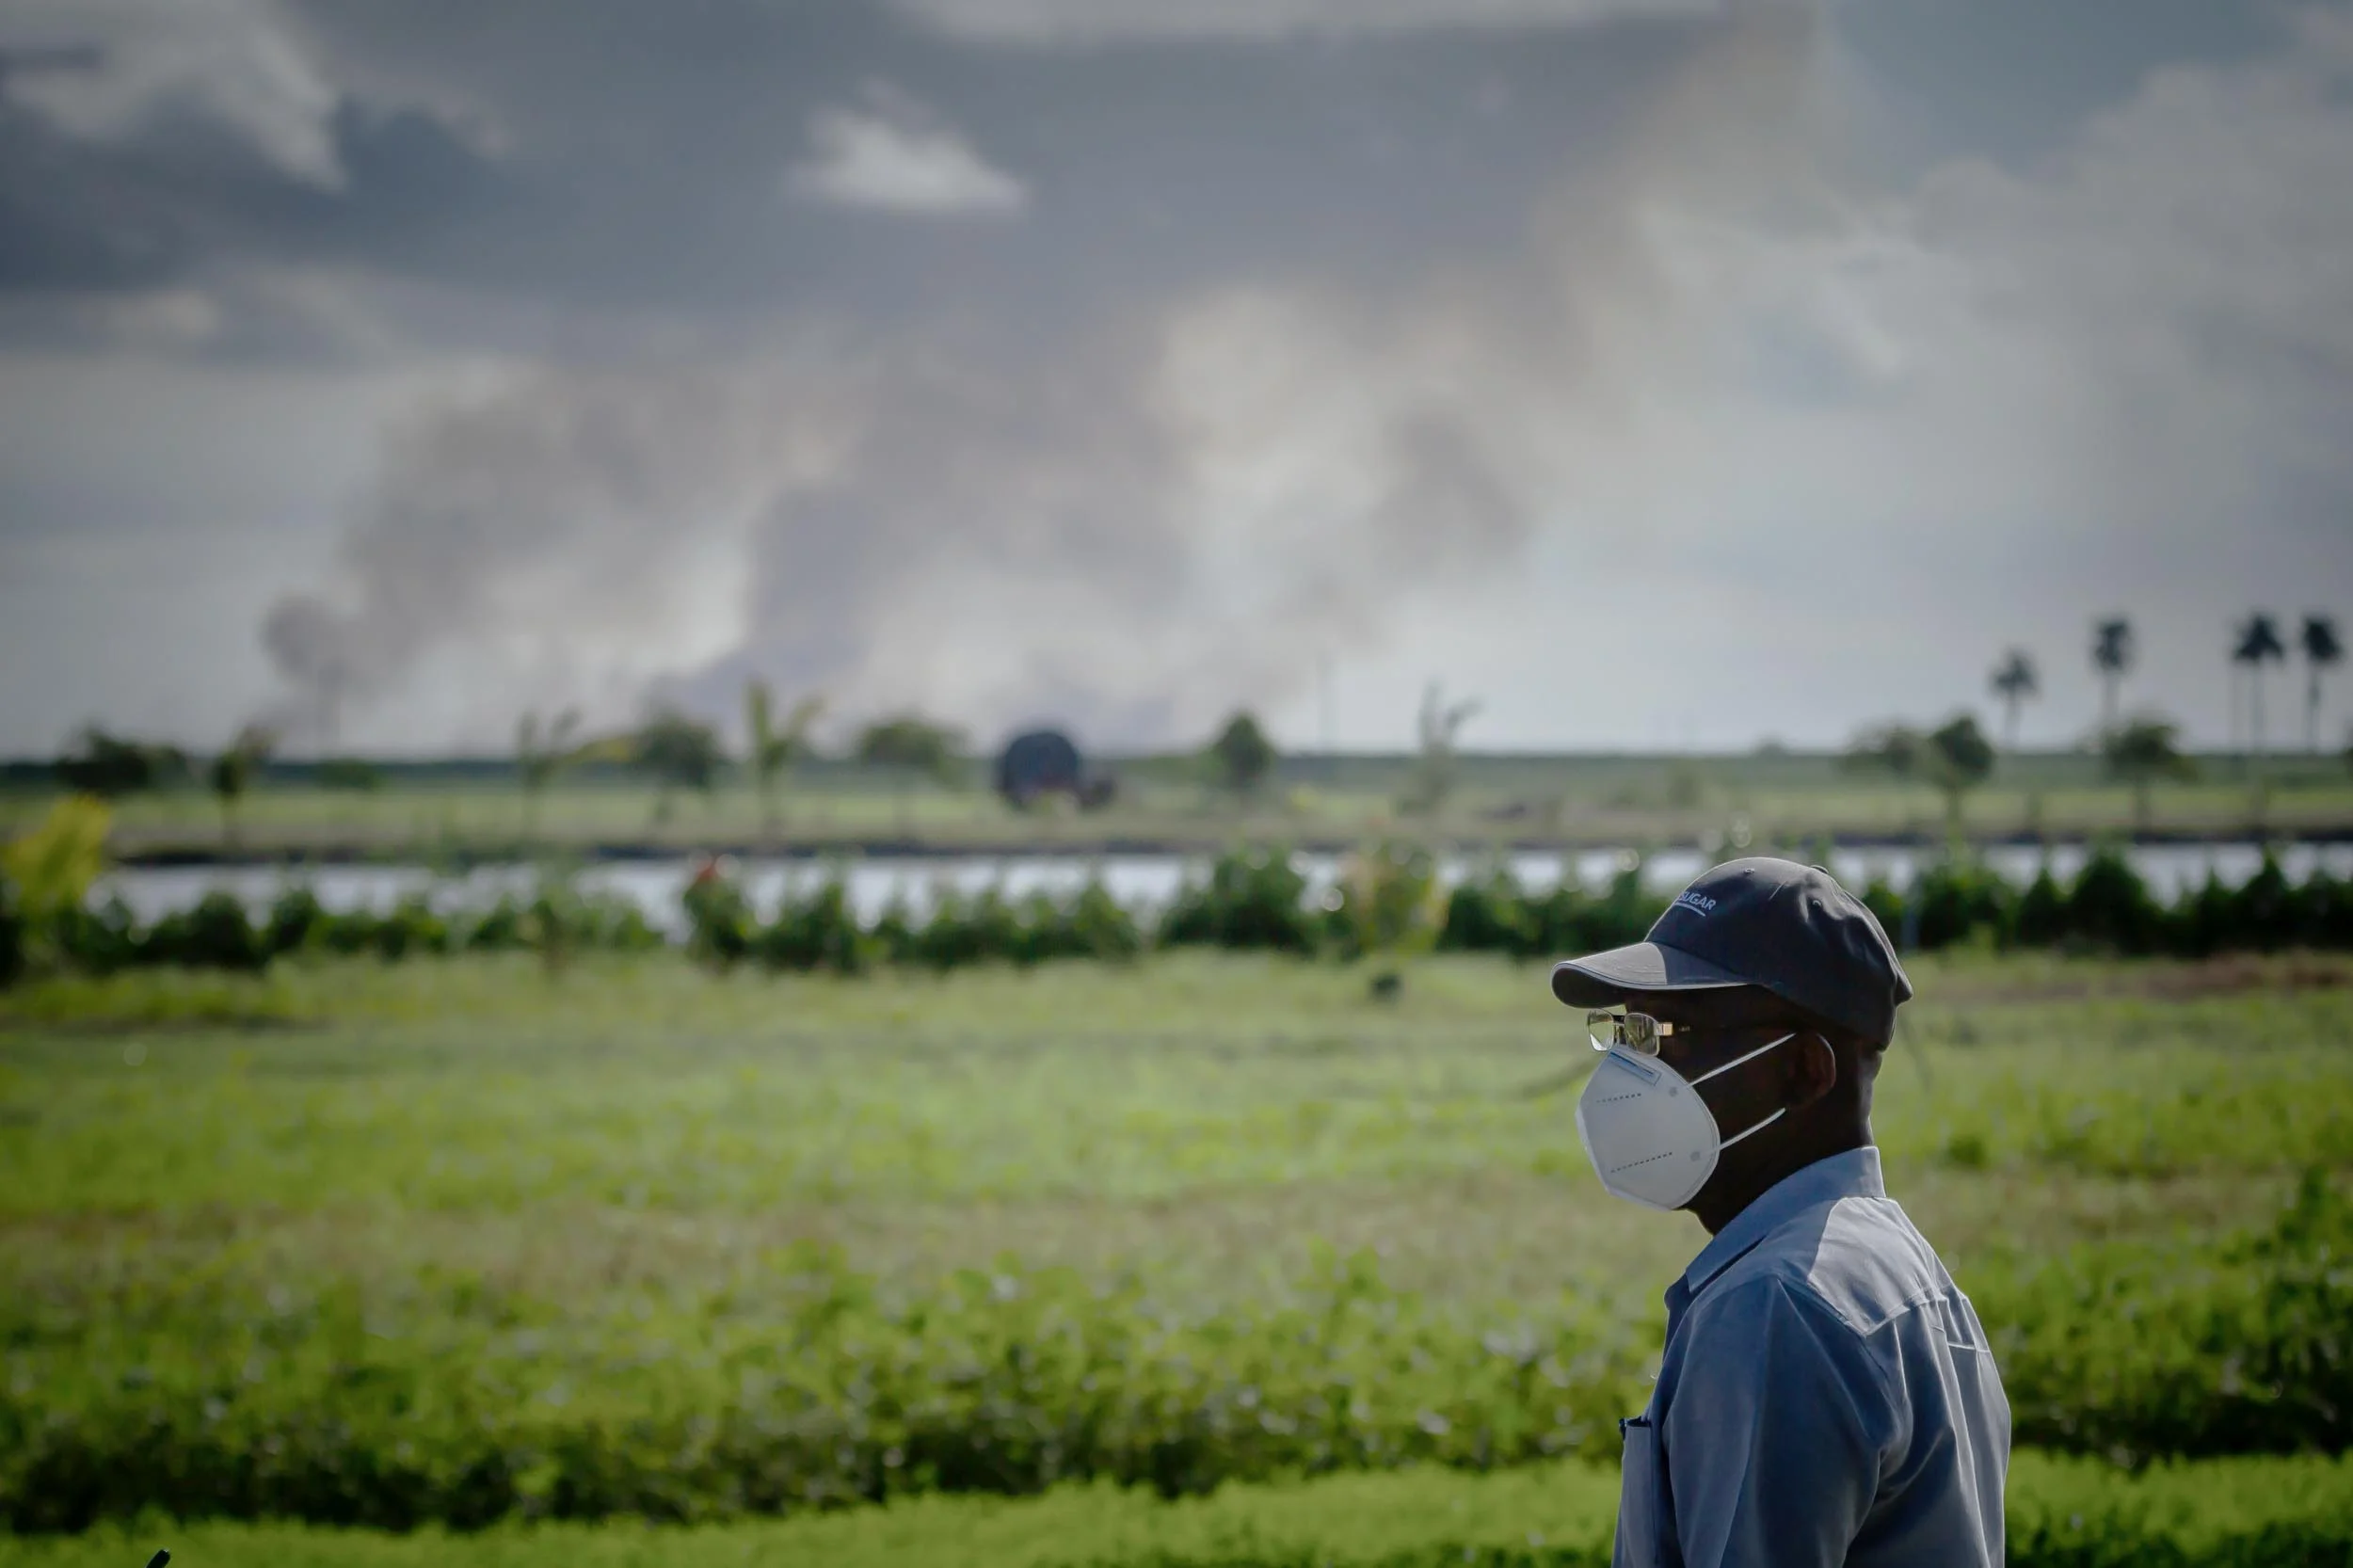 South Bay Mayor Joe Kyles stands in front of sugar cane fields, with smoke visible in the distance.